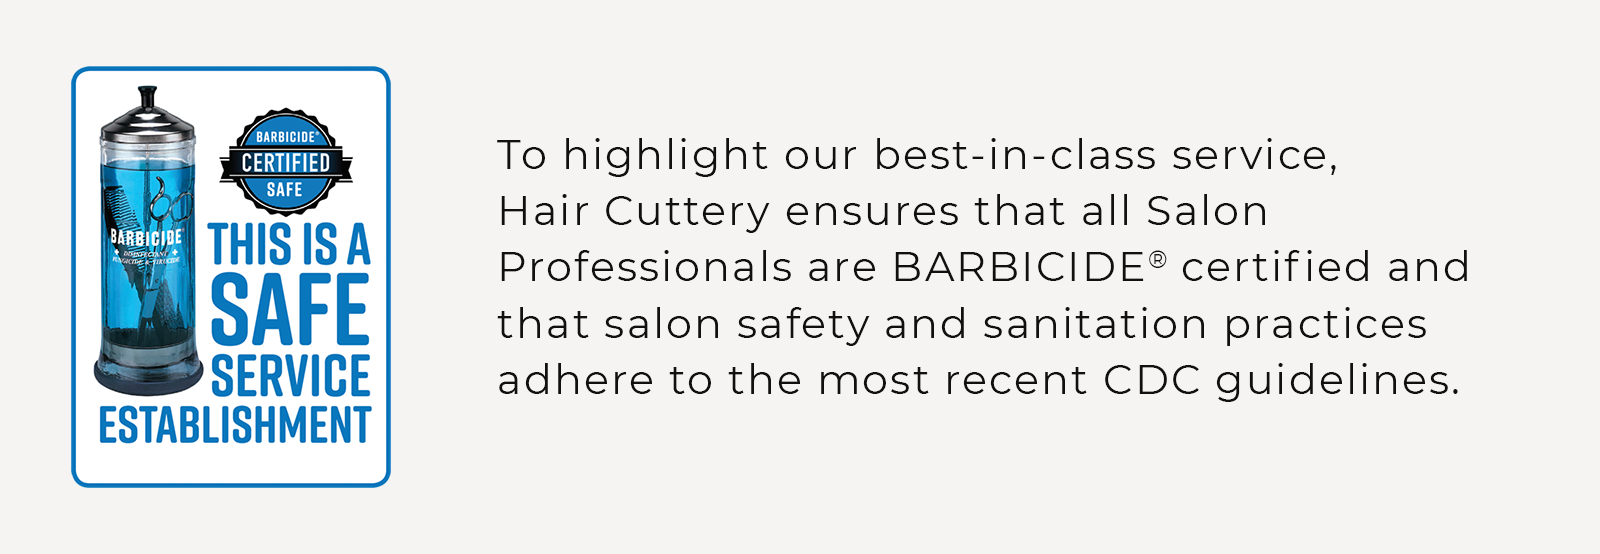 To highlight our best-in-class service, Hair Cuttery ensures that all Salon Professionals are BARBICIDE® certified and that salon safety and sanitation practices adhere to the most recent CDC guidelines.